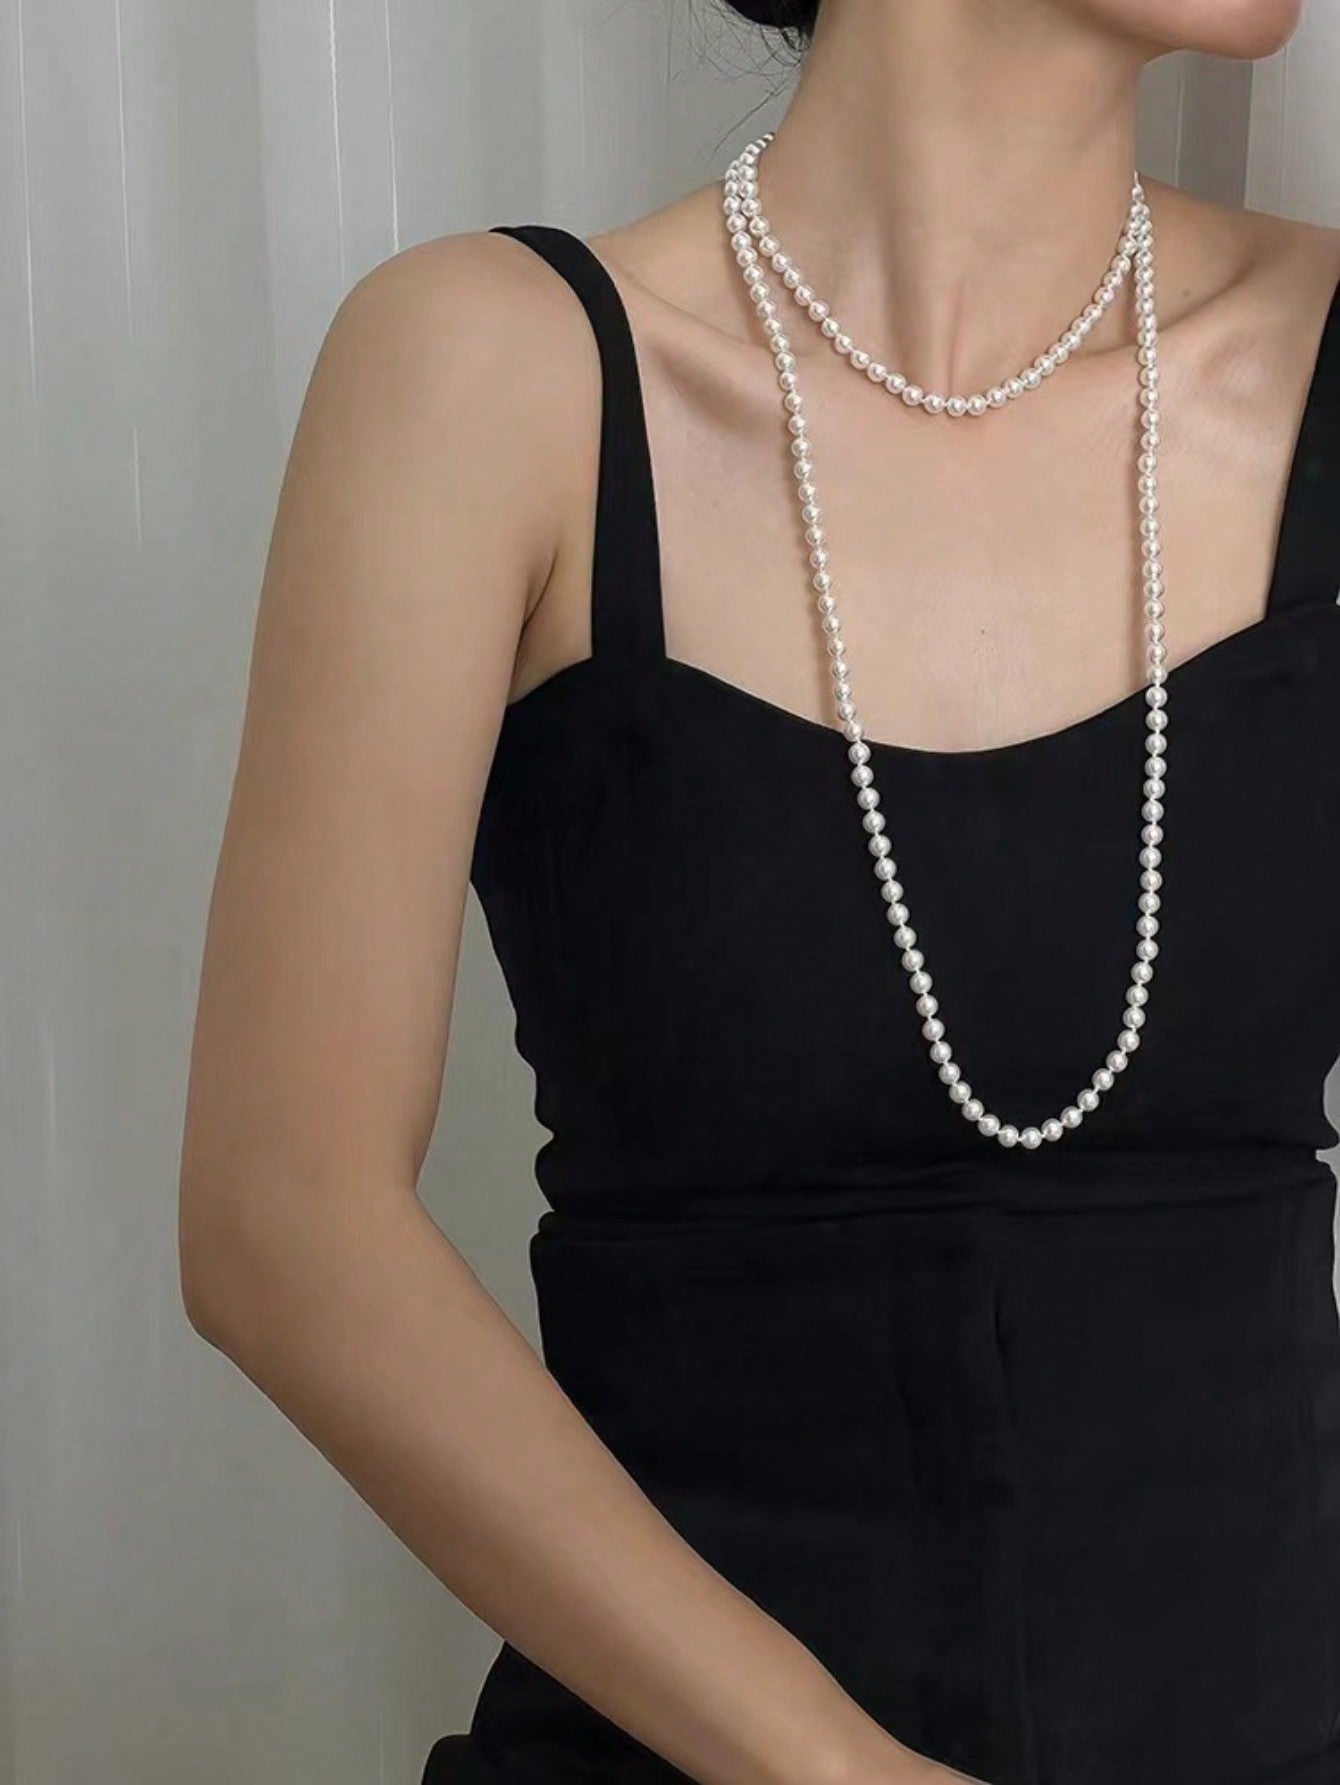 Charmer 8mm Classic 150cm White Pearl Long Necklace Sweater Chain